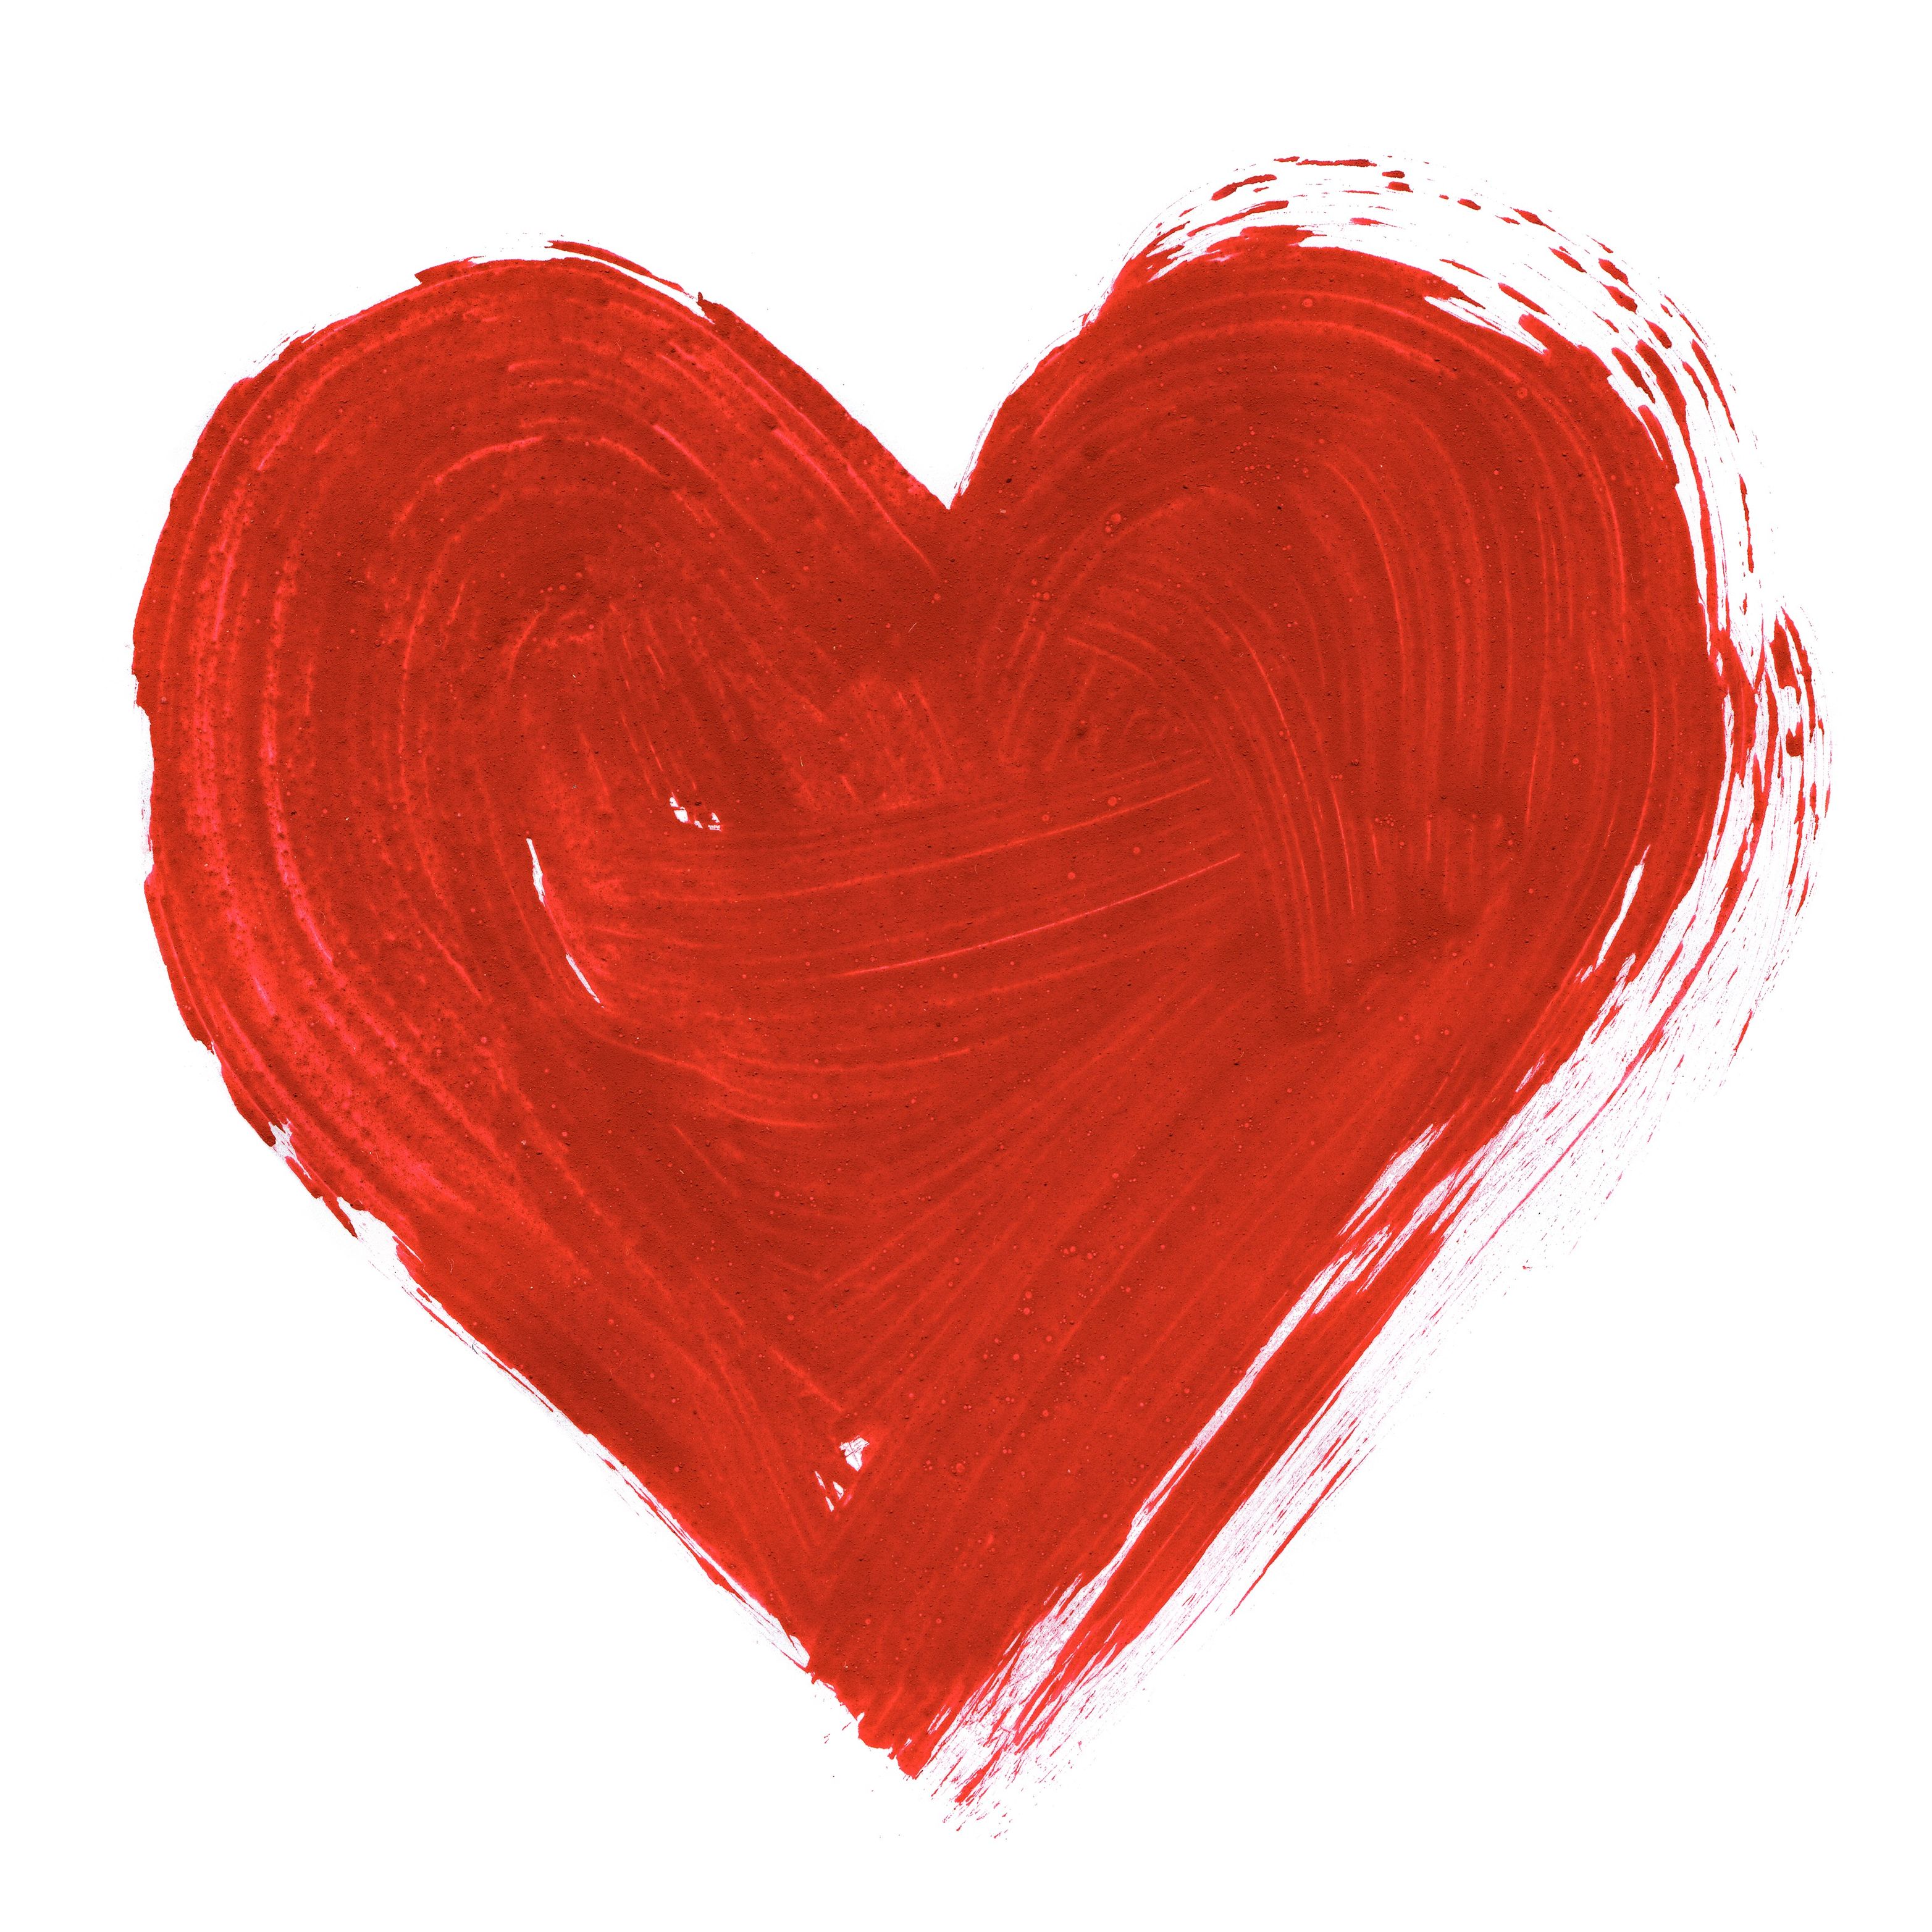 Free Downloadable Hearts With No Backgroung - ClipArt Best